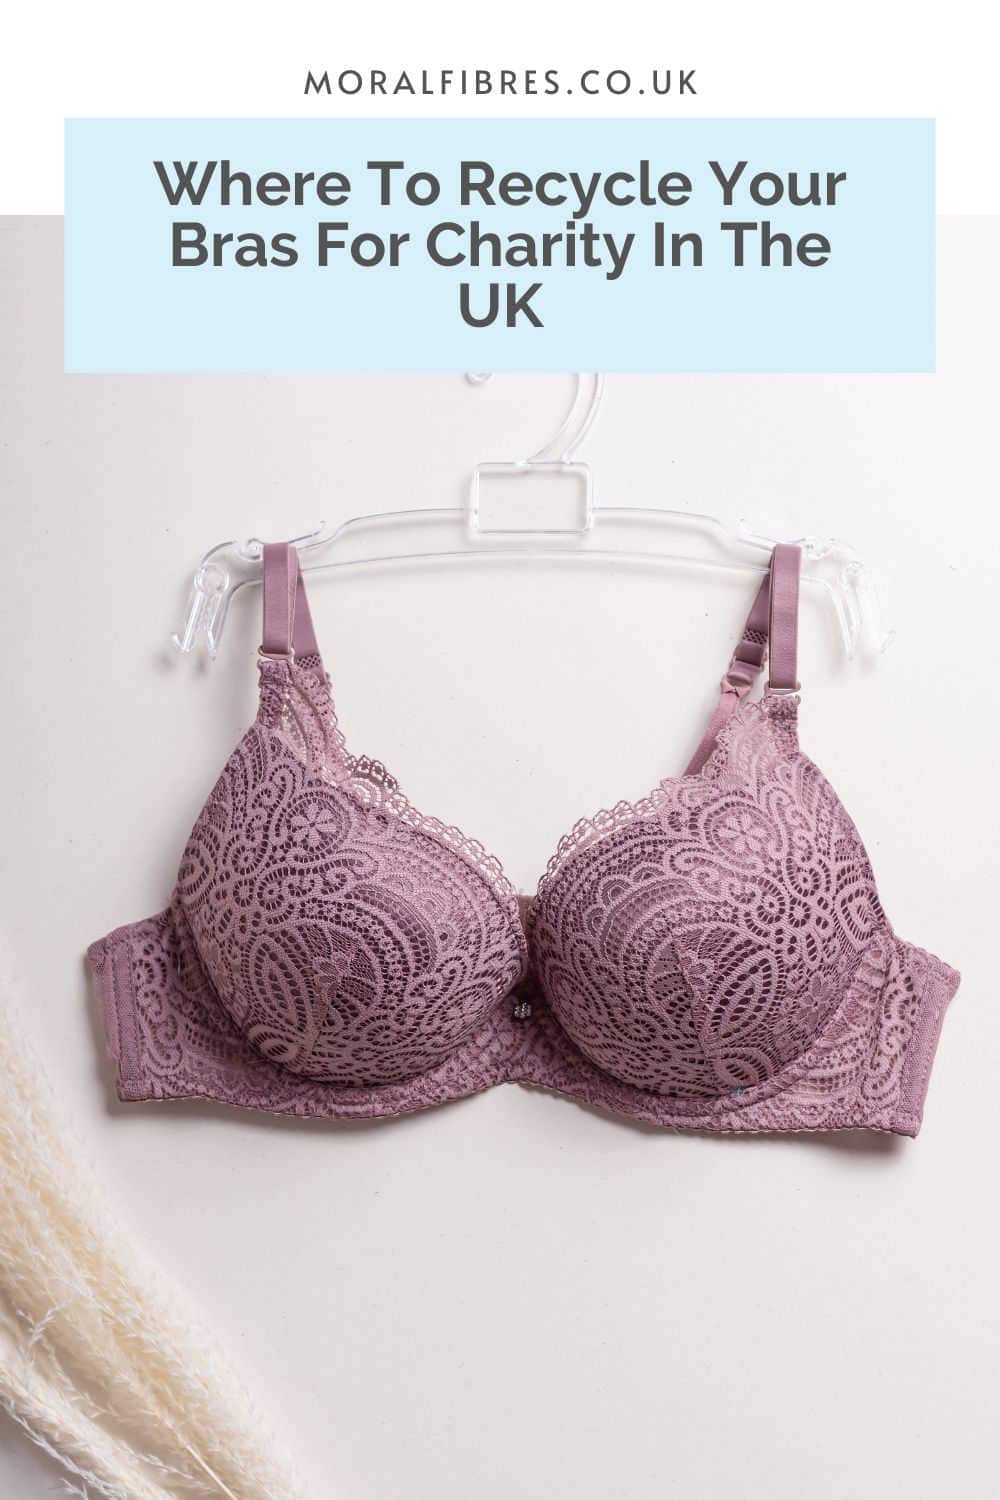 Purple bra hanging on a hanger against a white wall with a blue text box that reads where to recycle your bras for charity in the UK.